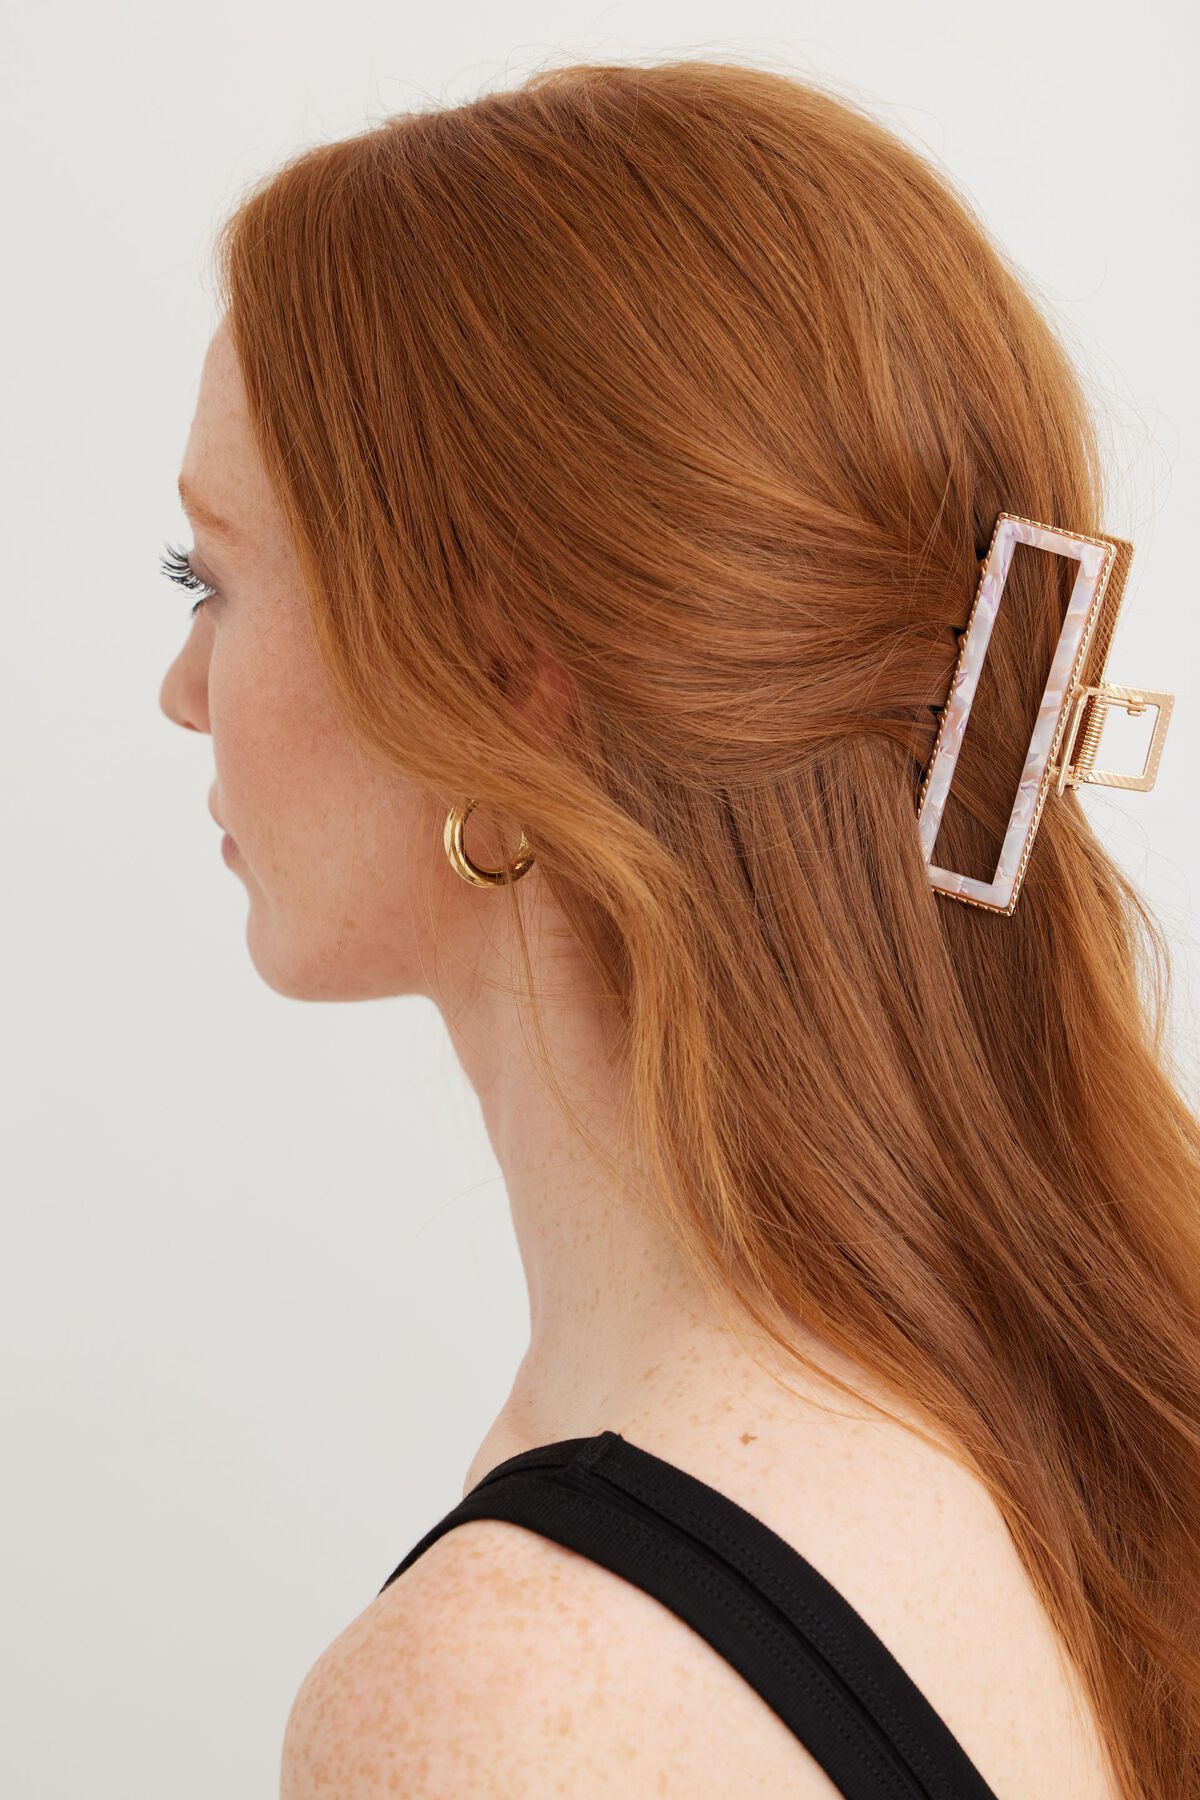 Dynamite Metal Rectangle Claw Hair Clip. 1